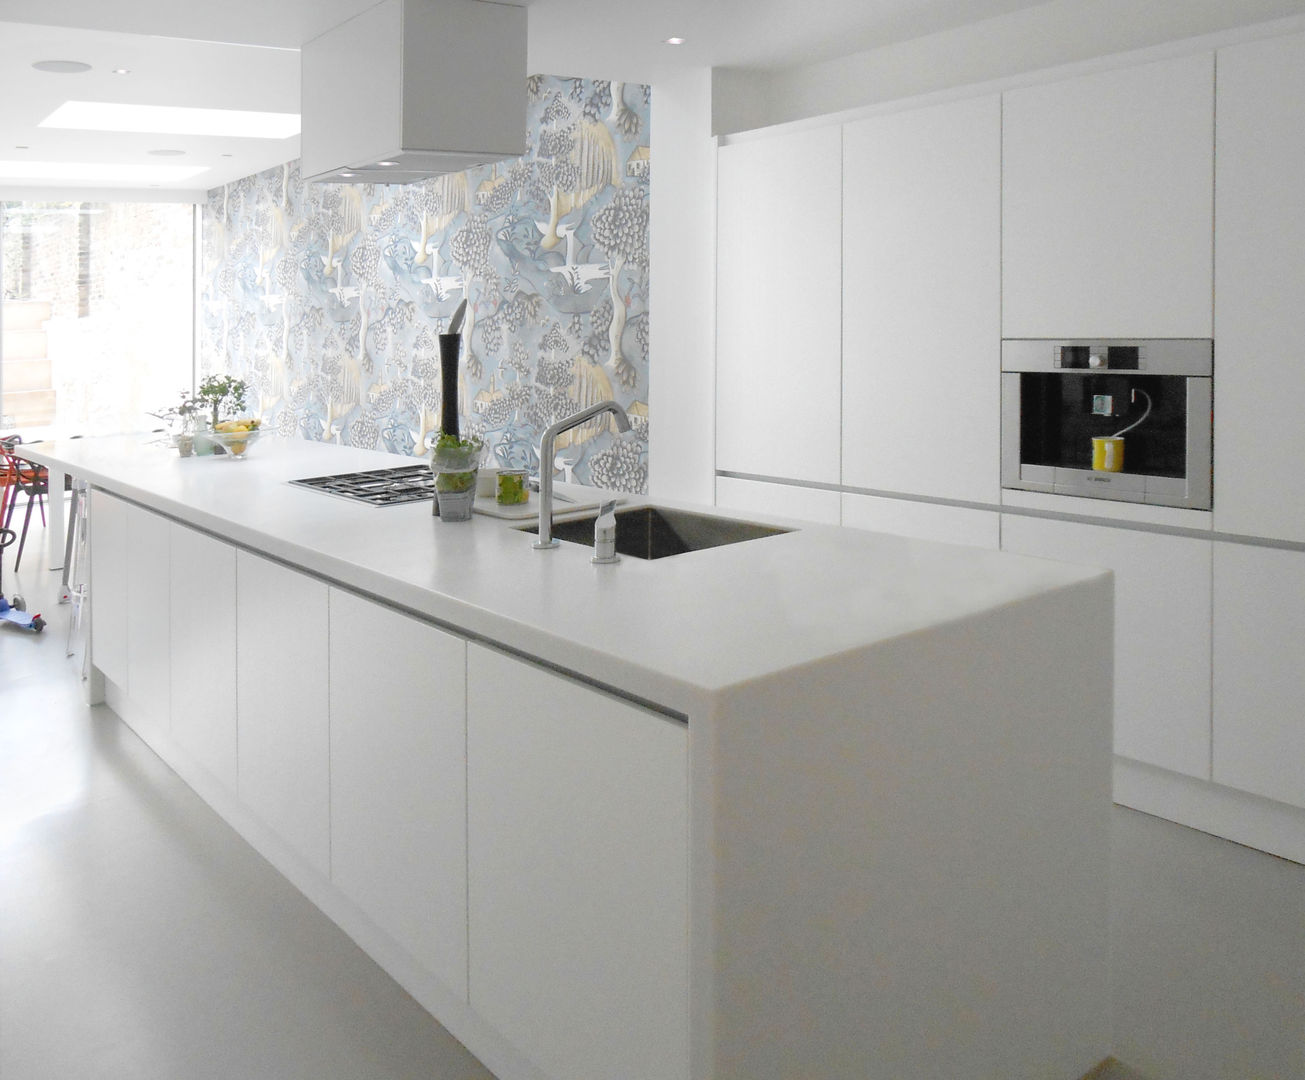 basement creation and 3 storey house extension, Ar'Chic Ar'Chic Minimalist kitchen